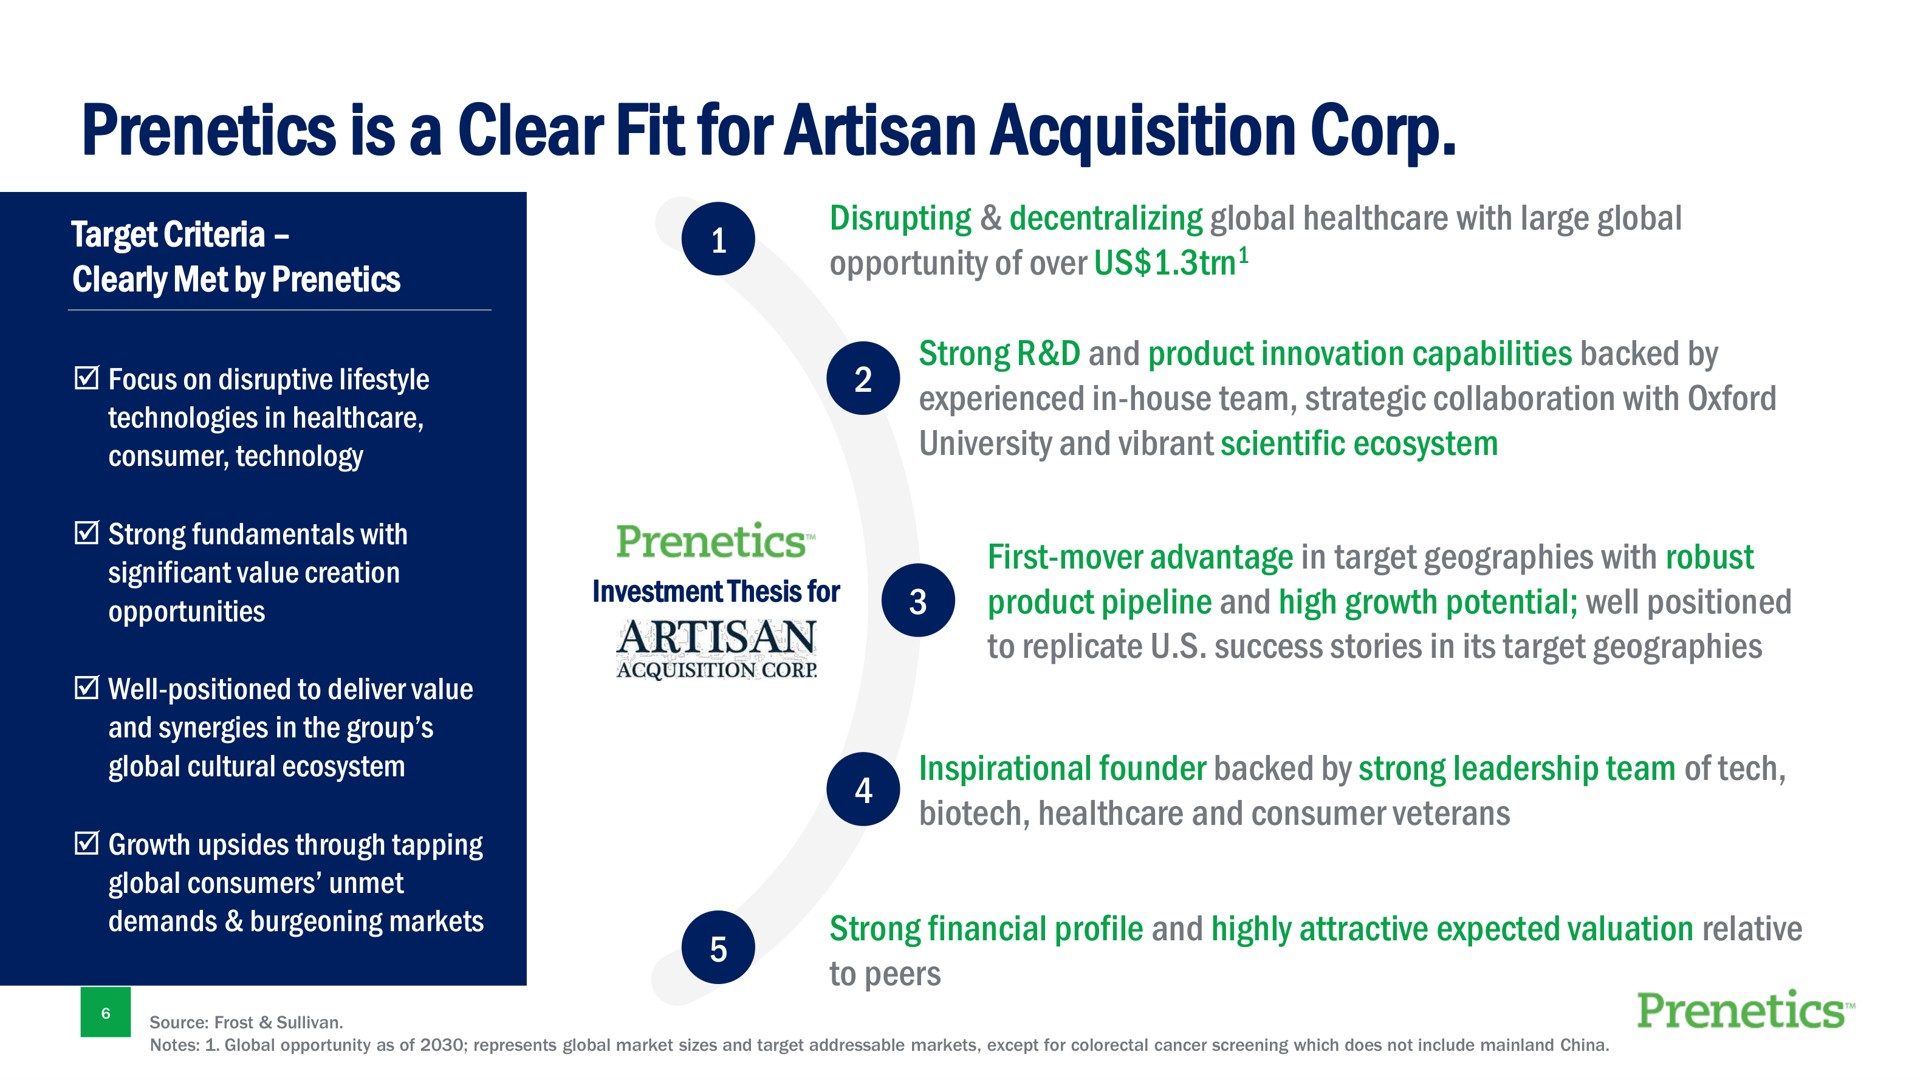 is a clear fit for artisan acquisition corp | Prenetics